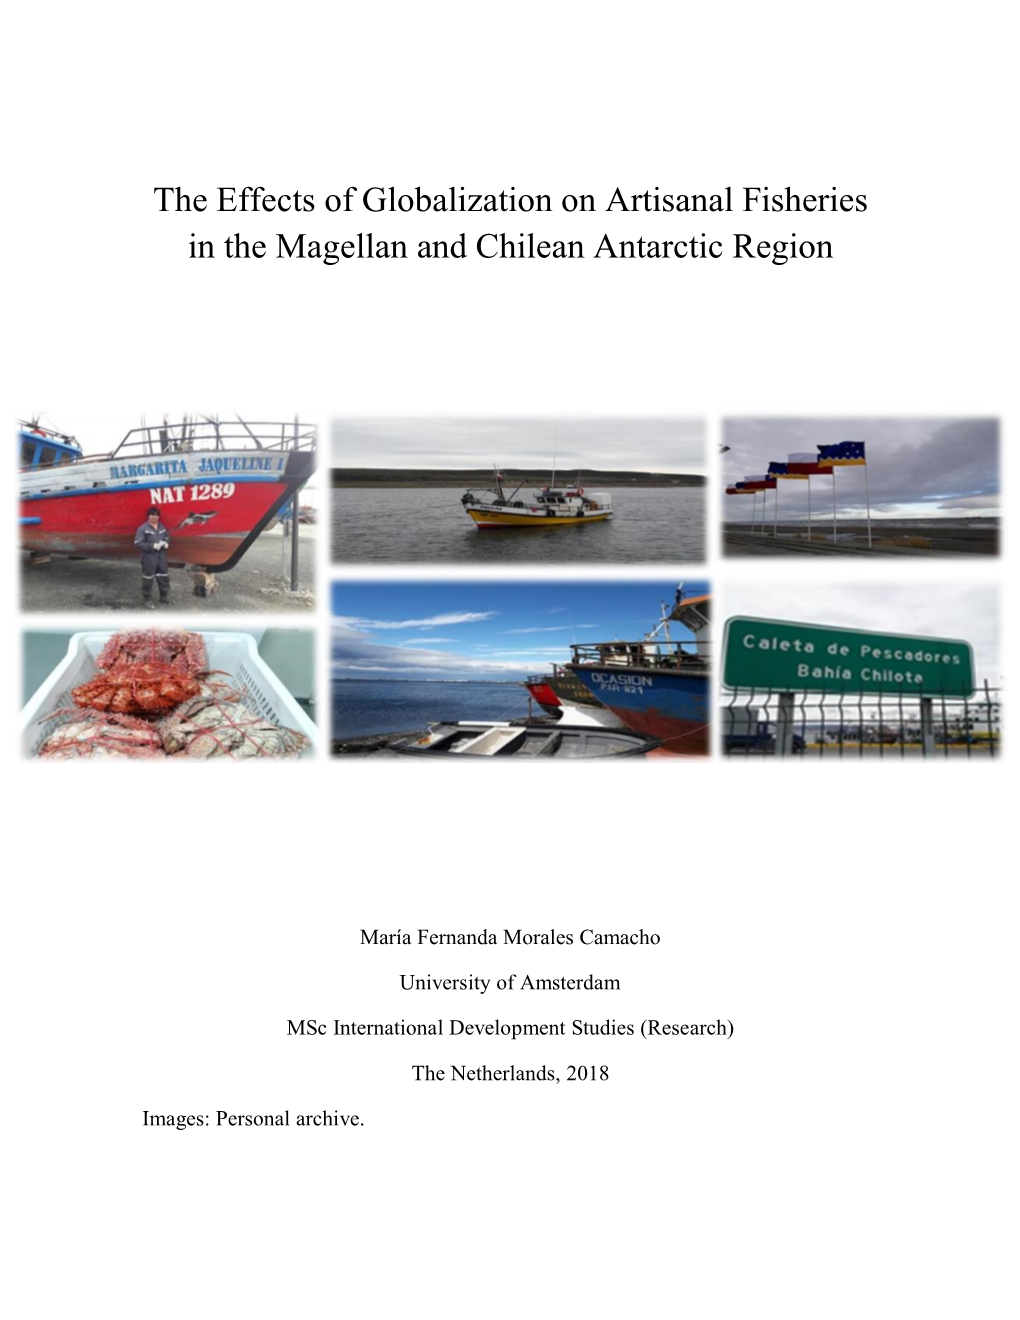 The Effects of Globalization on Artisanal Fisheries in the Magellan and Chilean Antarctic Region